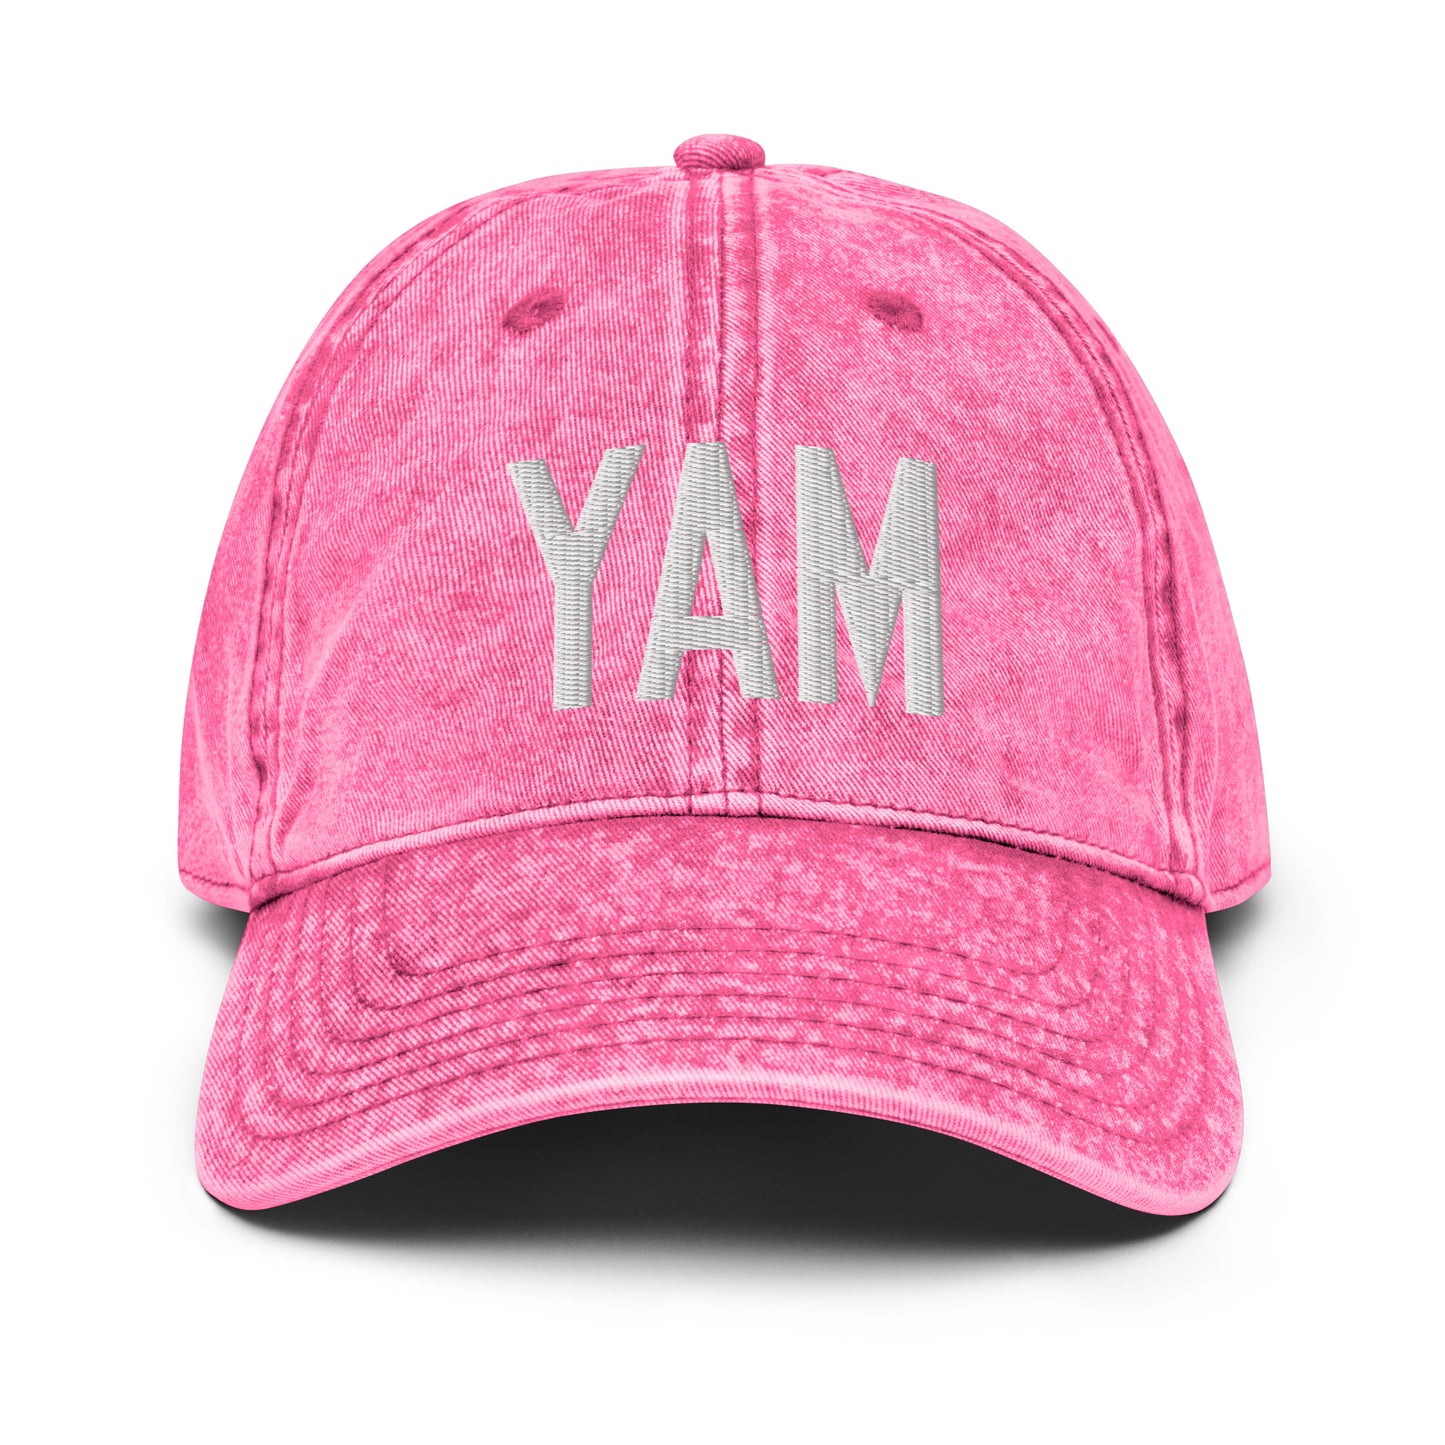 Airport Code Twill Cap - White • YAM Sault-Ste-Marie • YHM Designs - Image 25